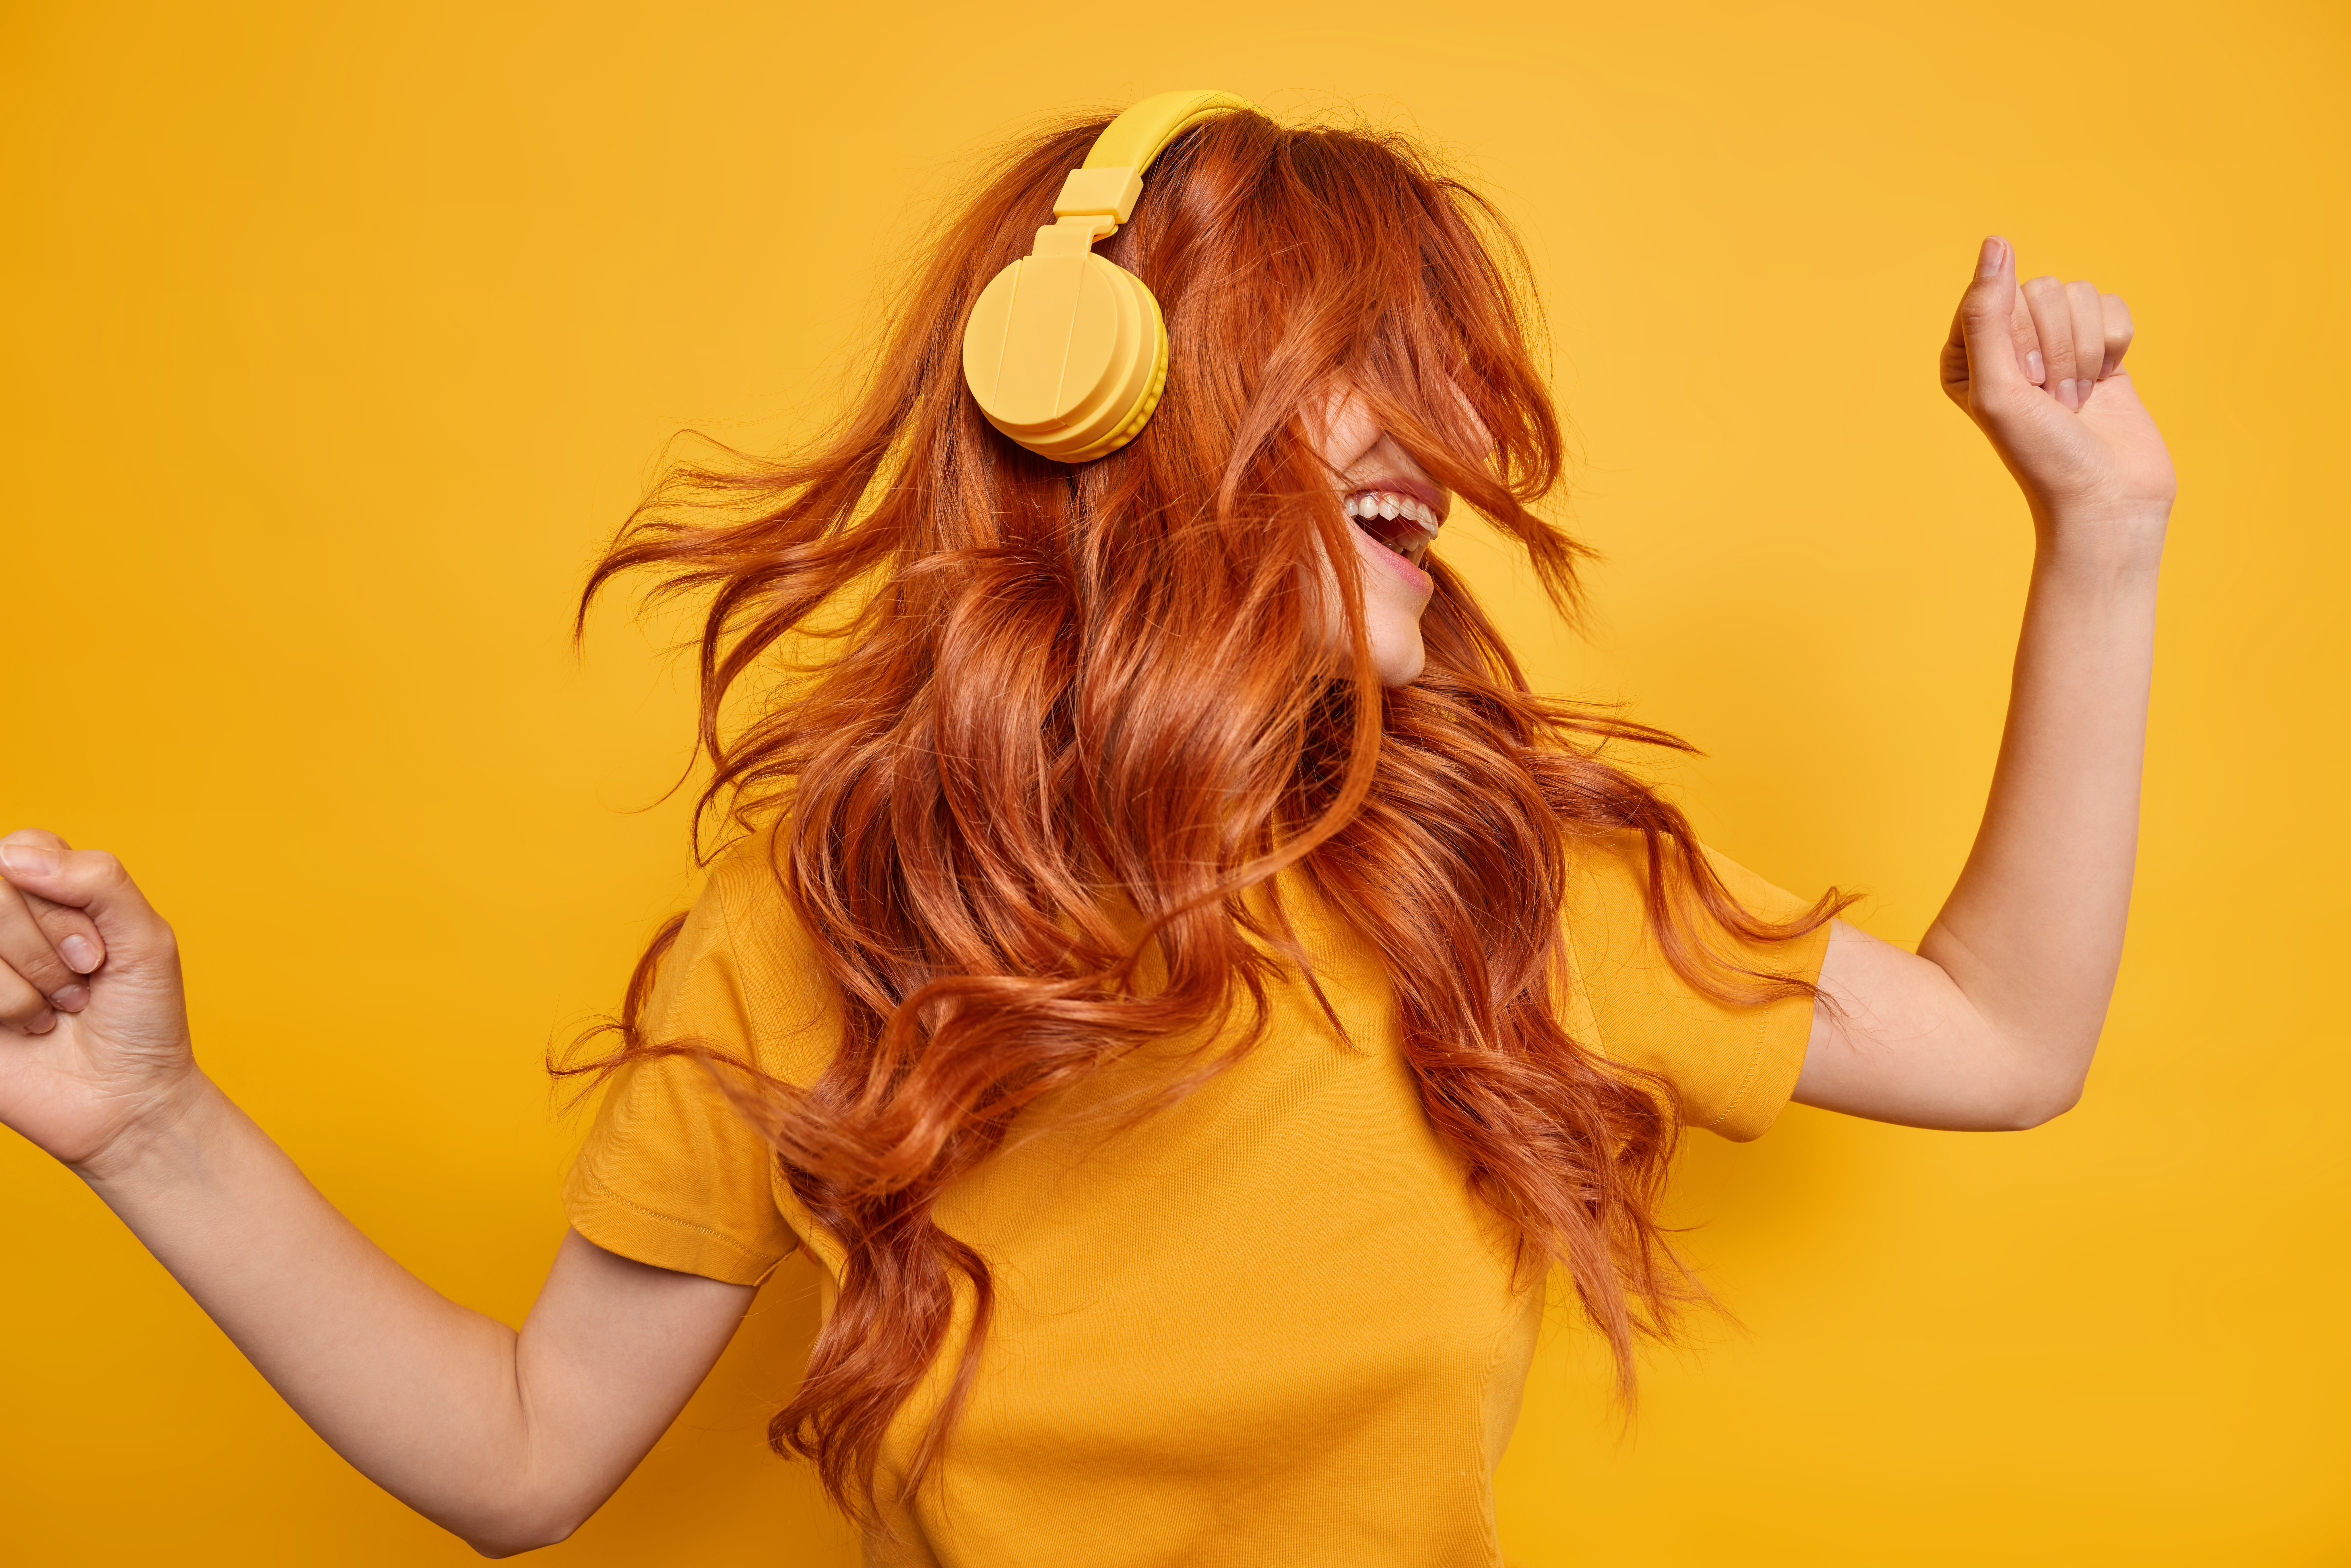 cool millennial girl keeps arms raised dances carefree enjoys every bit of music wears wireless headphones on ears has red hair floating on wind dressed in casual t shirt isolated over yellow wall